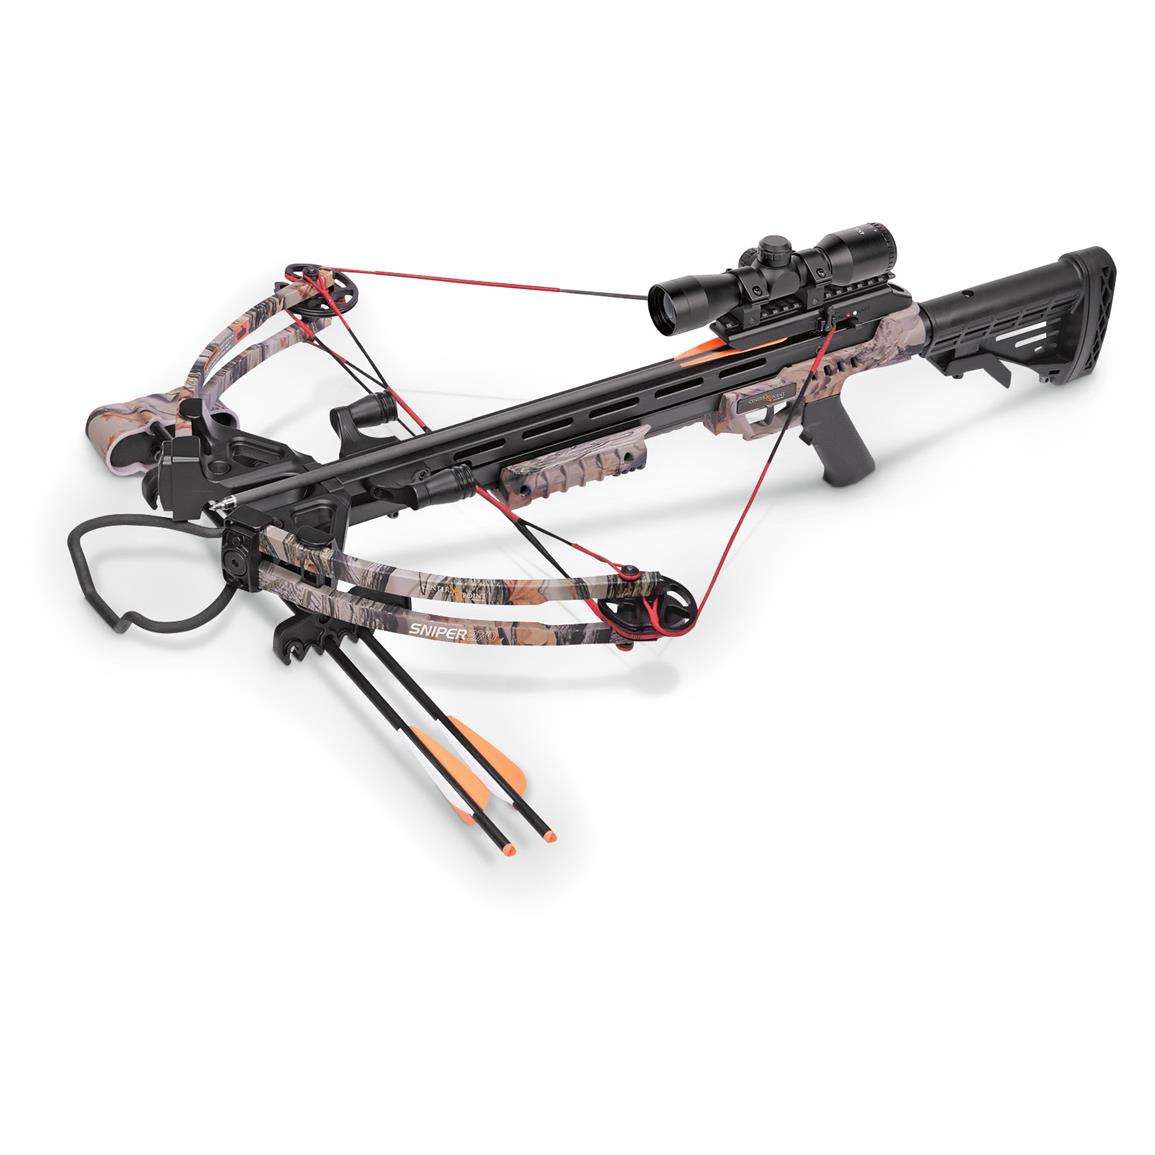 centerpoint-sniper-370-crossbow-package-camouflage-walmart